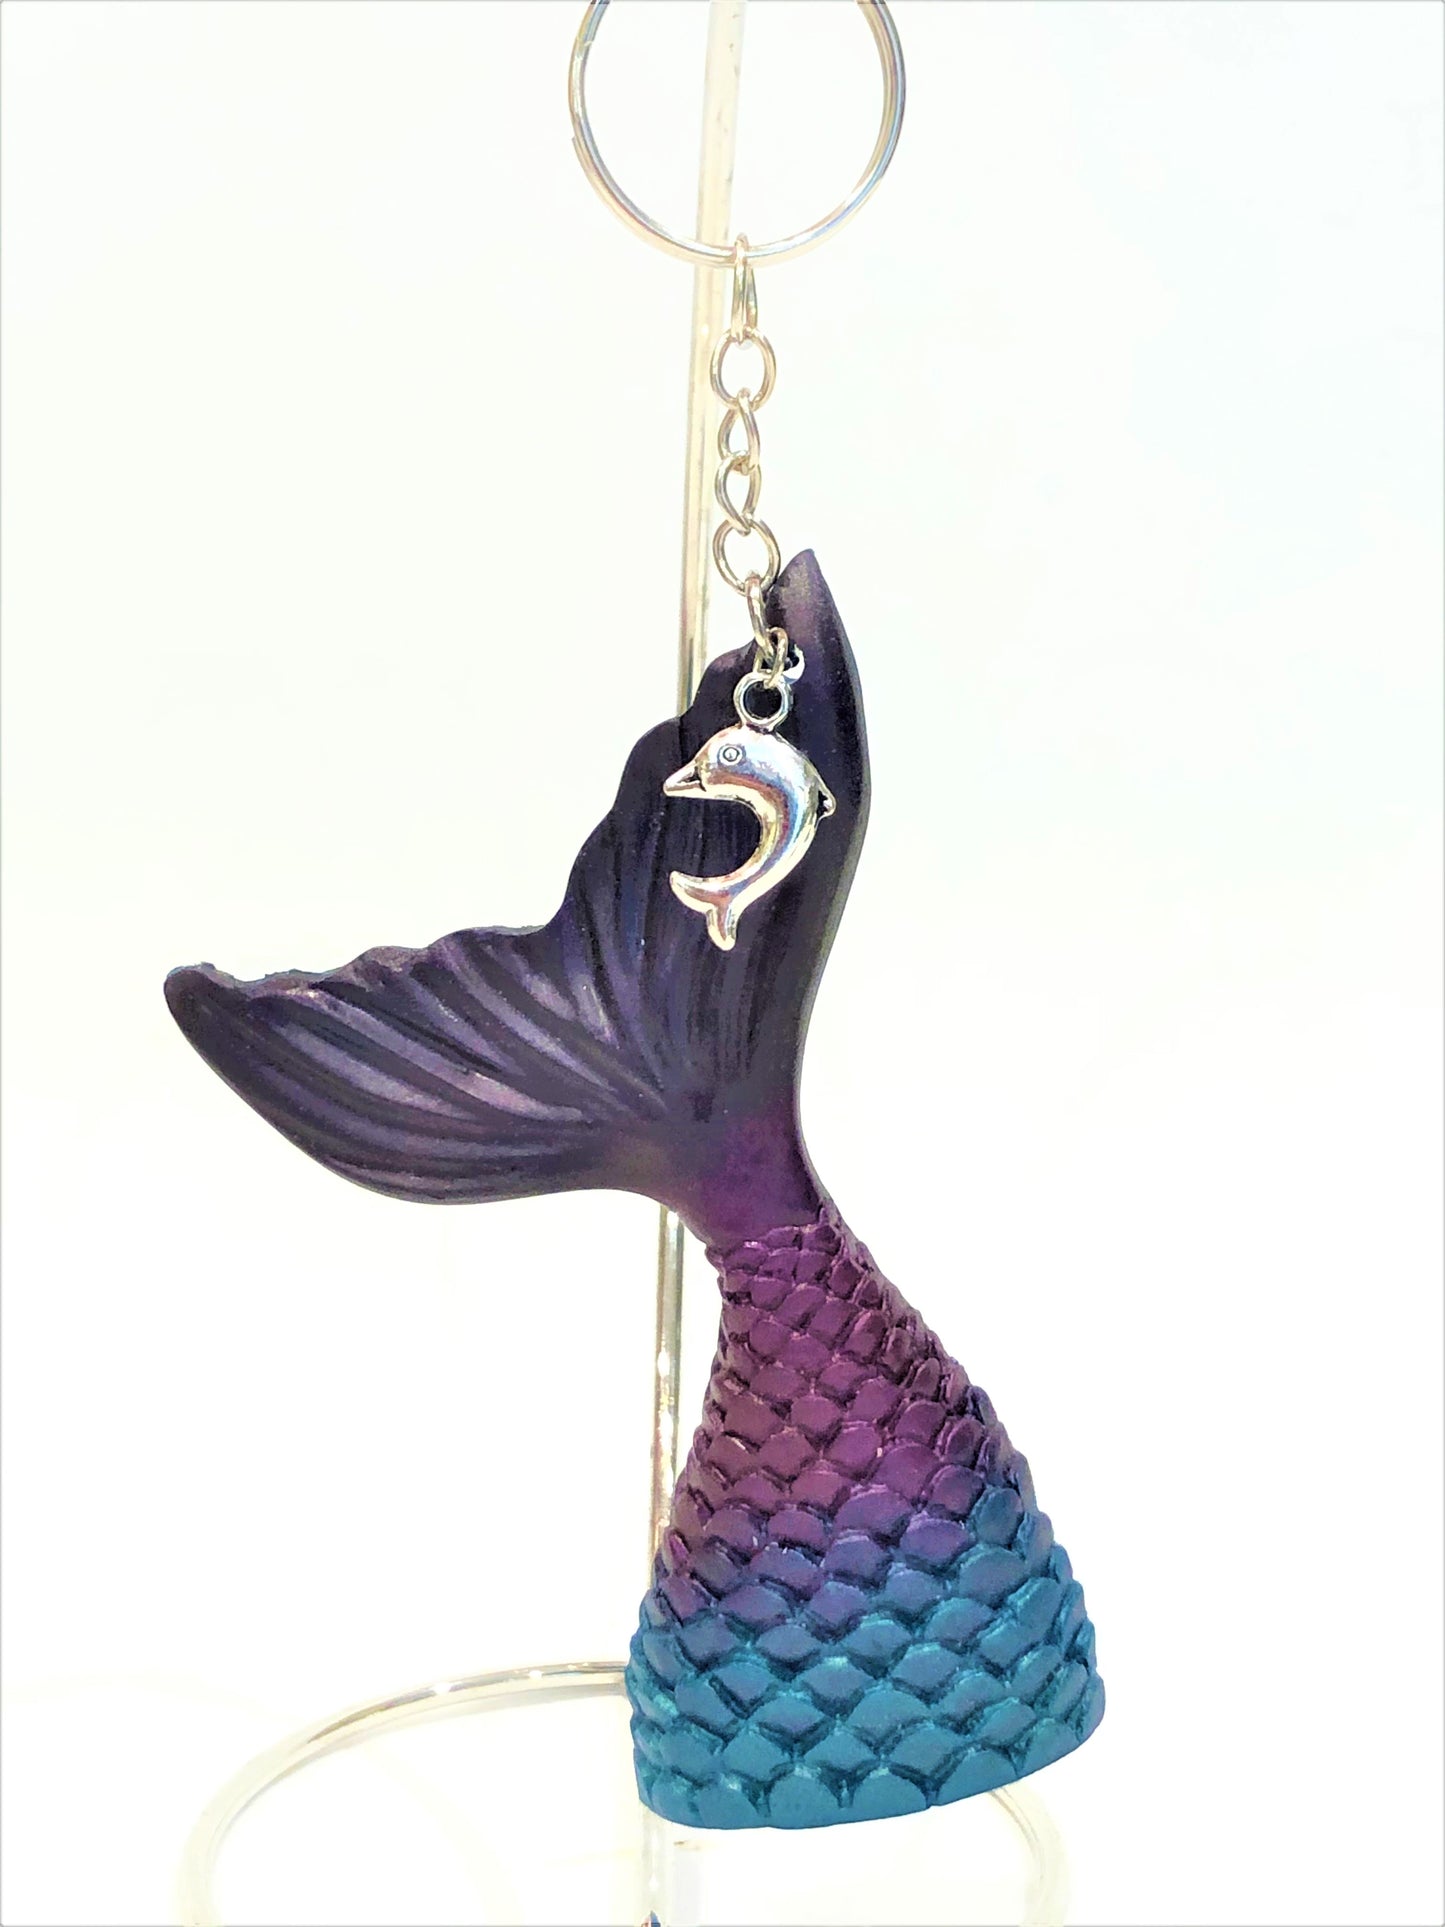 Large Mermaid Tail Key Chain with Charm